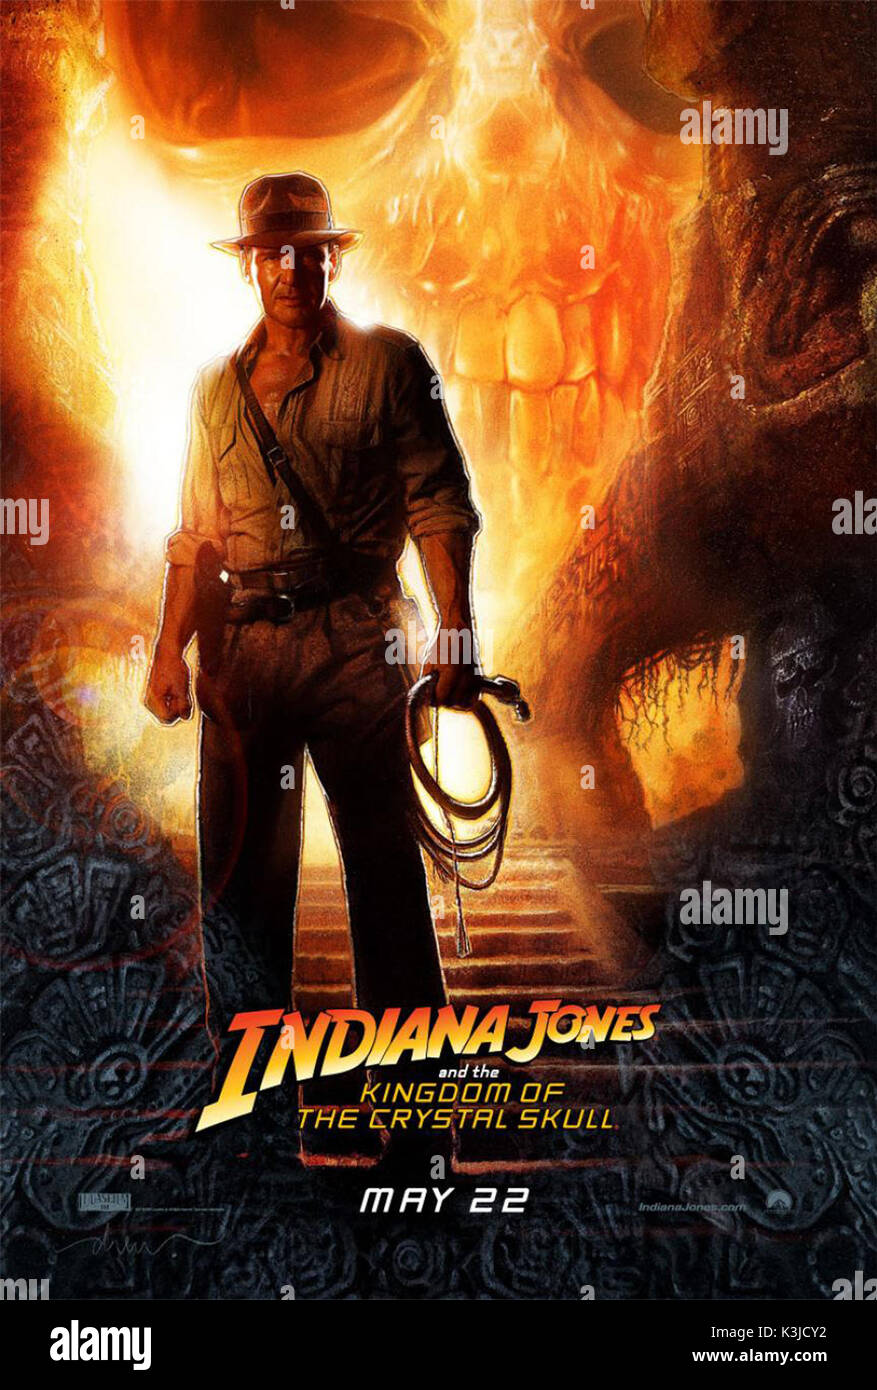 INDIANA JONES AND THE KINGDOM OF THE CRYSTAL SKULL HARRISON FORD INDIANA JONES AND THE KINGDOM OF THE CRYSTAL SKULL     Date: 2008 Stock Photo